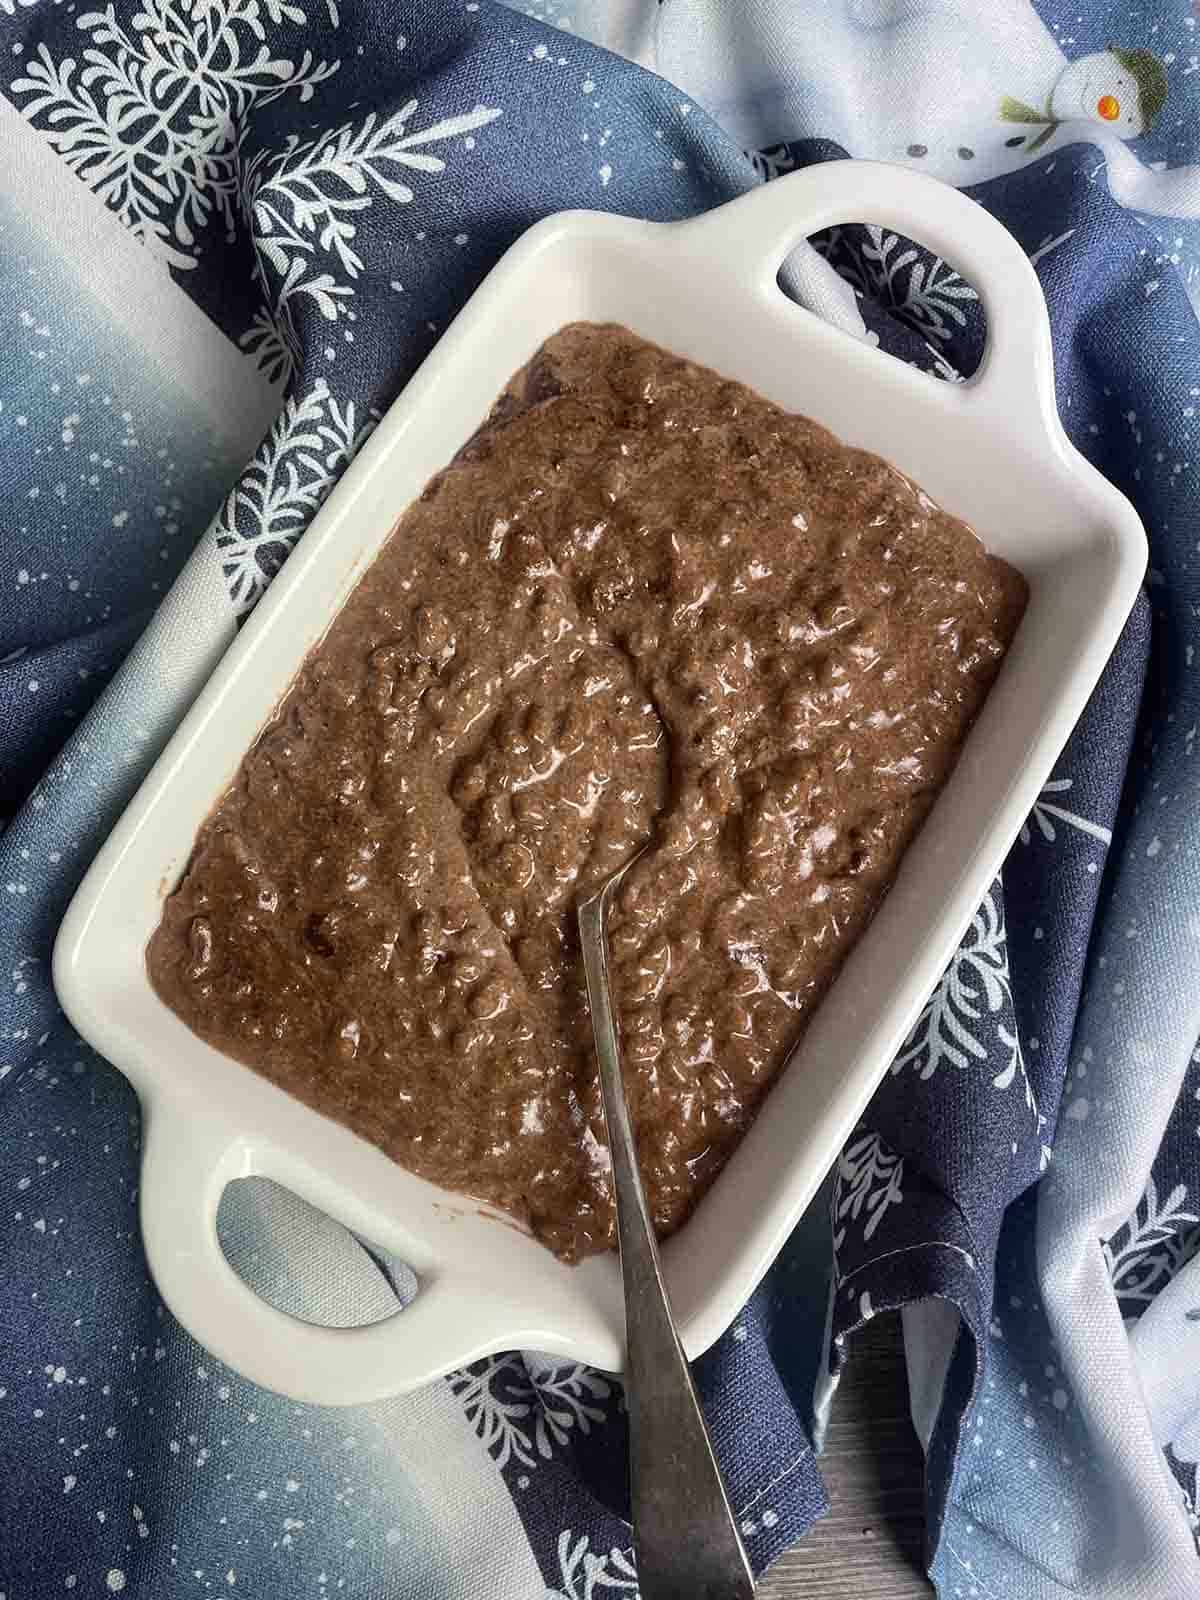 chocolate rice pudding in a dish.